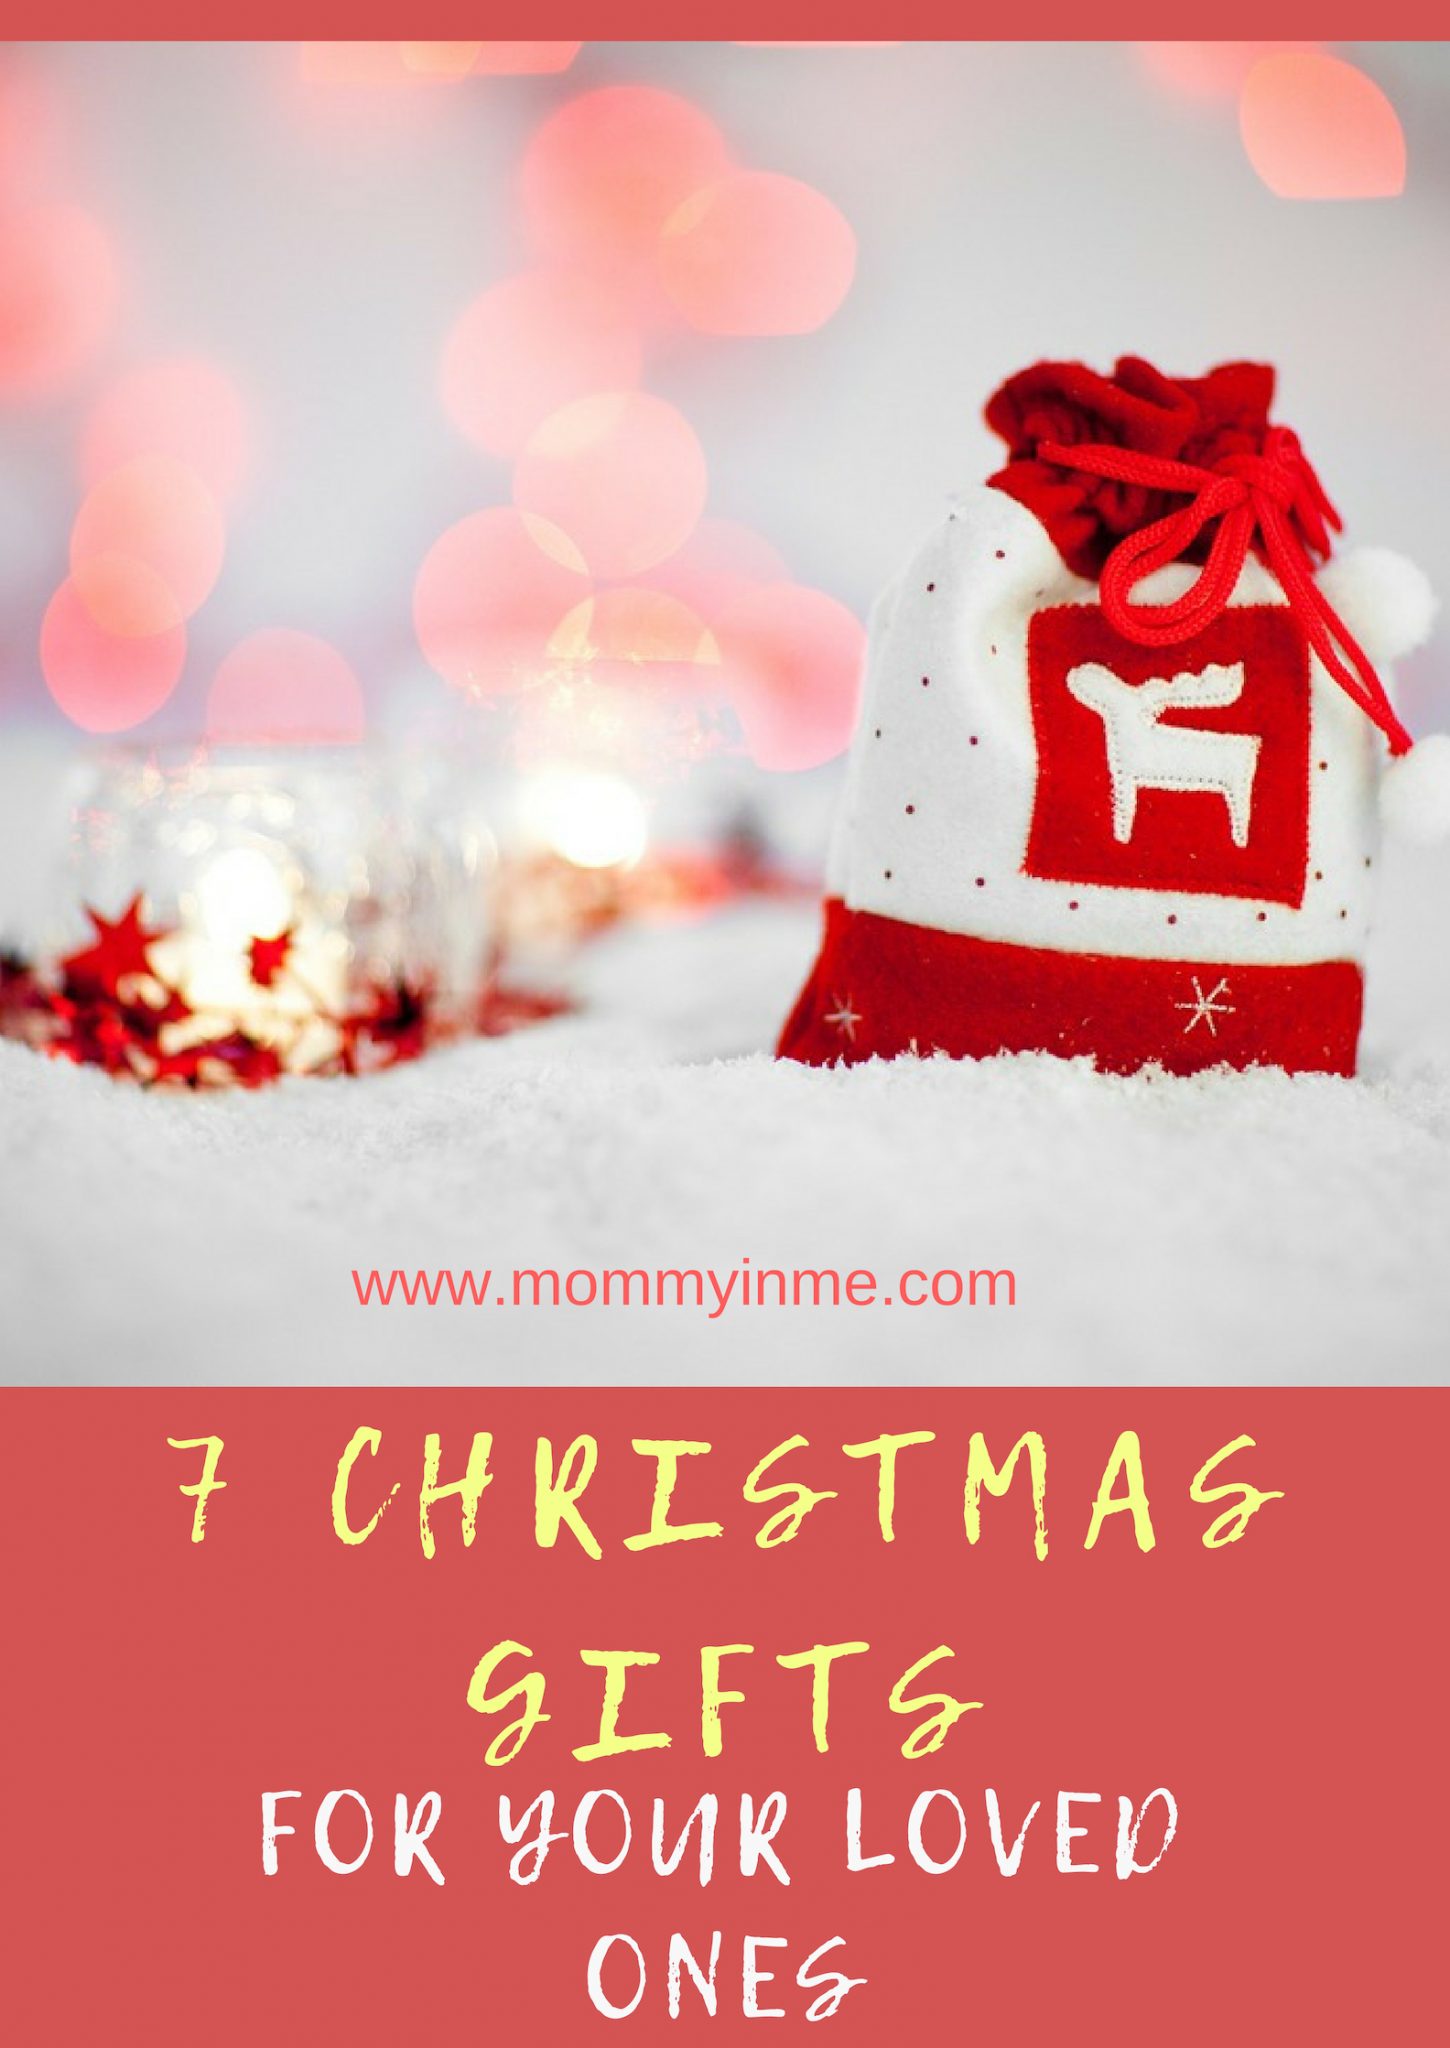 Its Christmas Time and are you all ready to indulge in some shopping for your loved ones? Confused? Then here are some 7 meaningful Christmas Gifts which your loved ones will enjoy for sure. Read more #Christmas #gifts #gifting #portraitpuzzle #chocolatefountain #travel